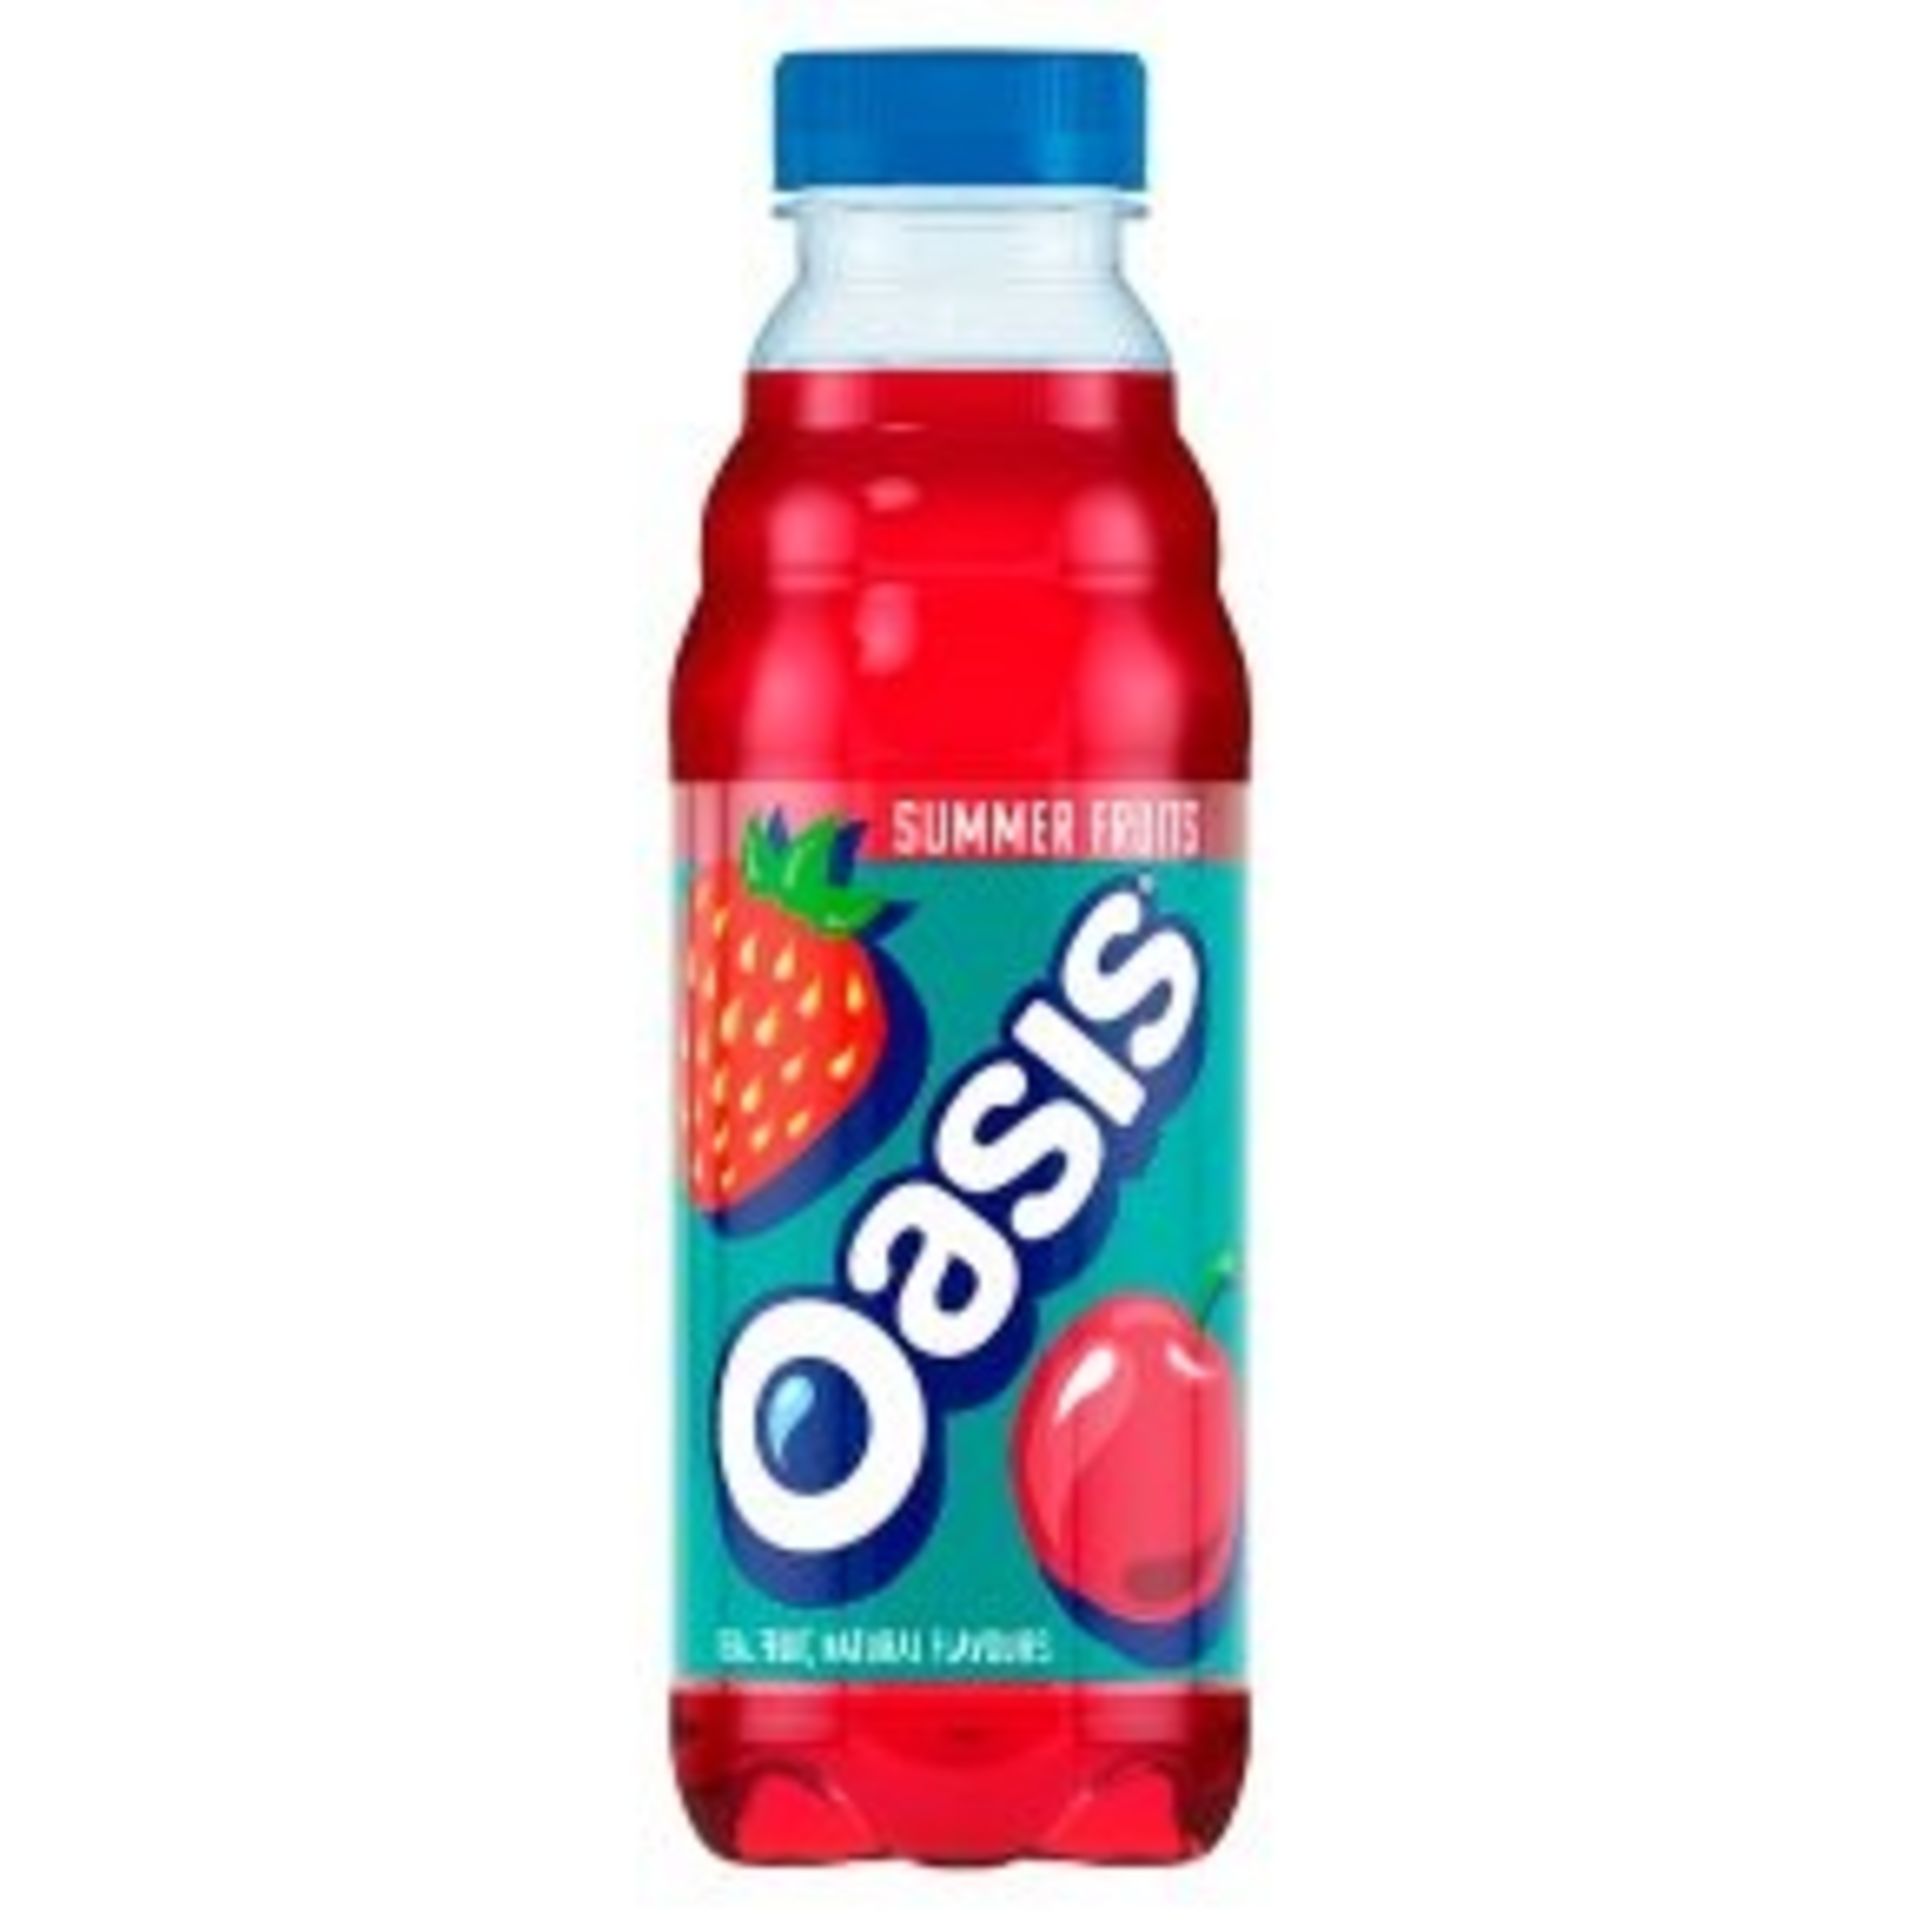 1 LOT TO CONTAIN 24 X 500ML BOTTLES OF OASIS SUMMER FRUITS / BEST BEFORE 31ST MAY 2019 / PN - 55 (